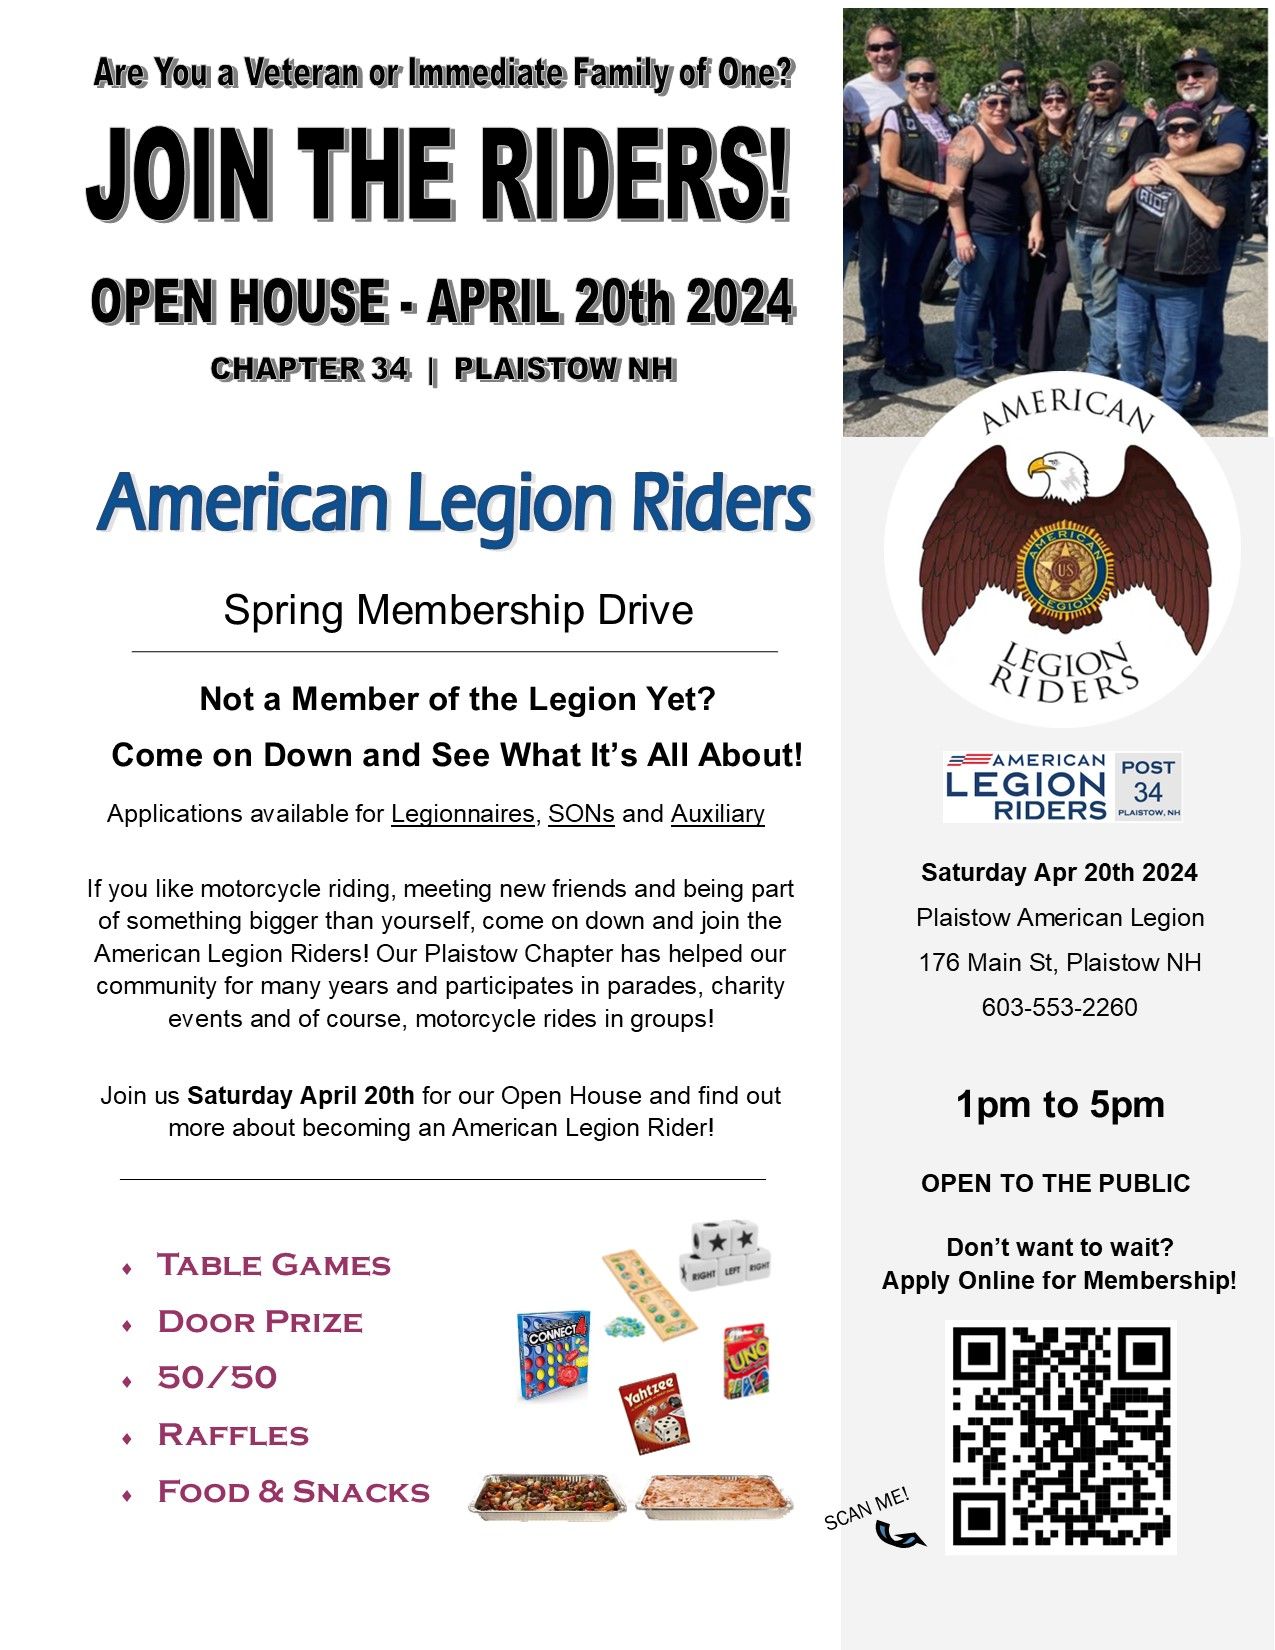 Open House April 20th 2024